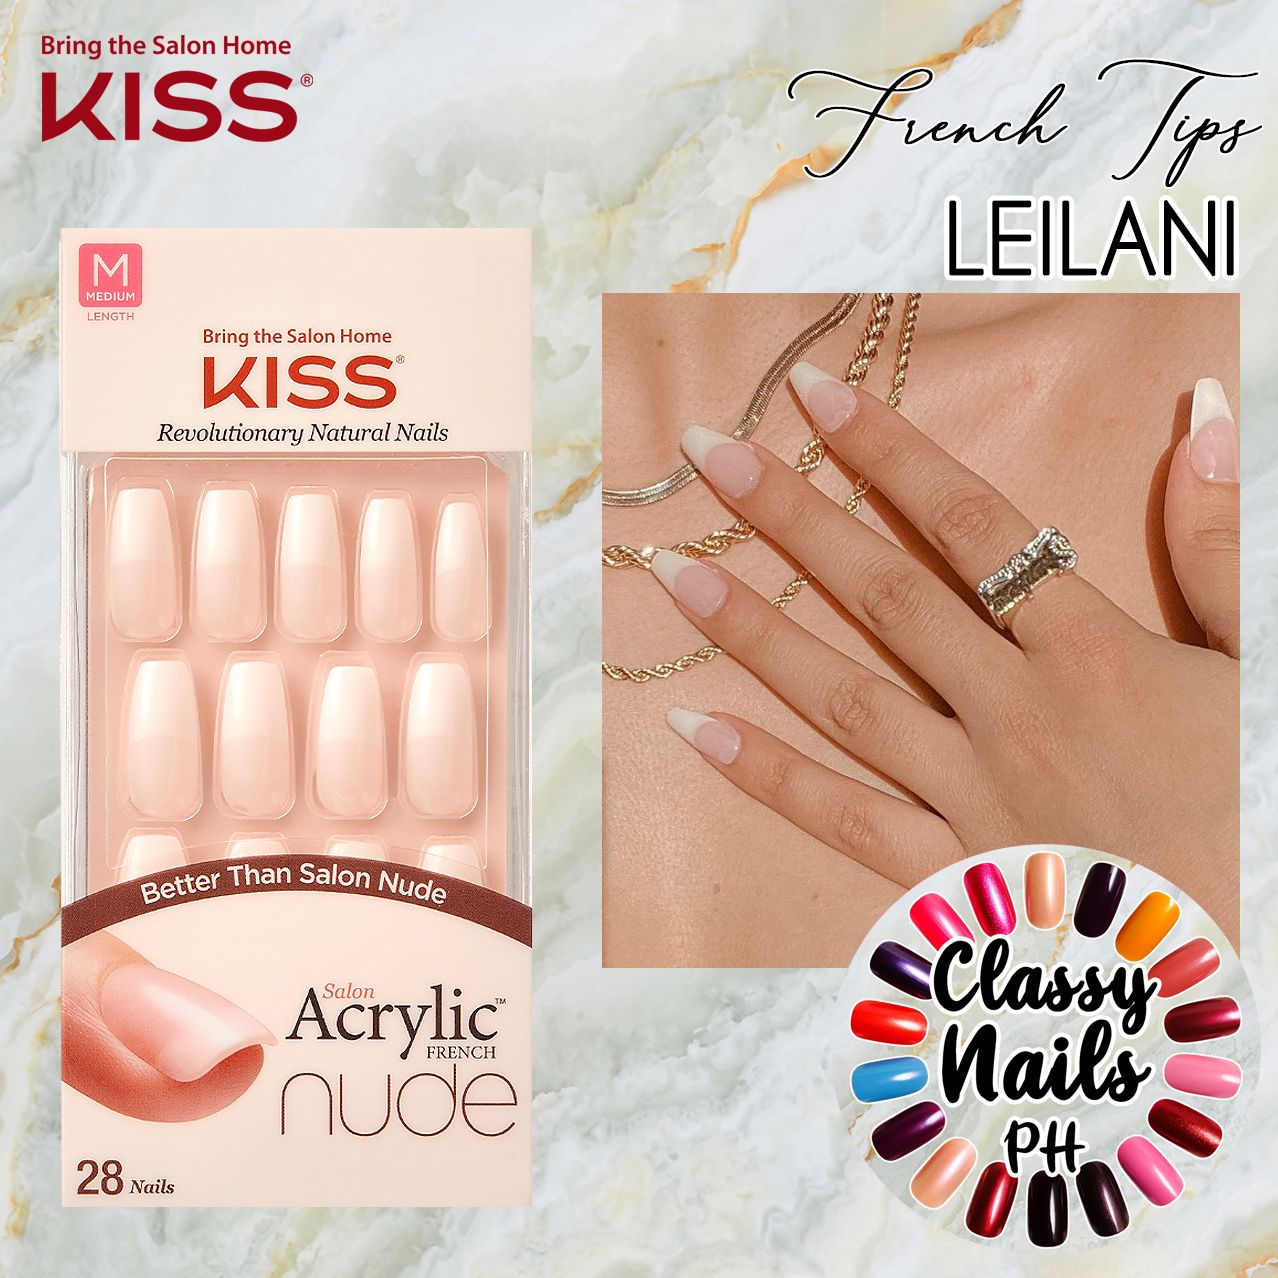 French Tip - Leilani KISS Nails • Glue On Manicure • Branded High ...